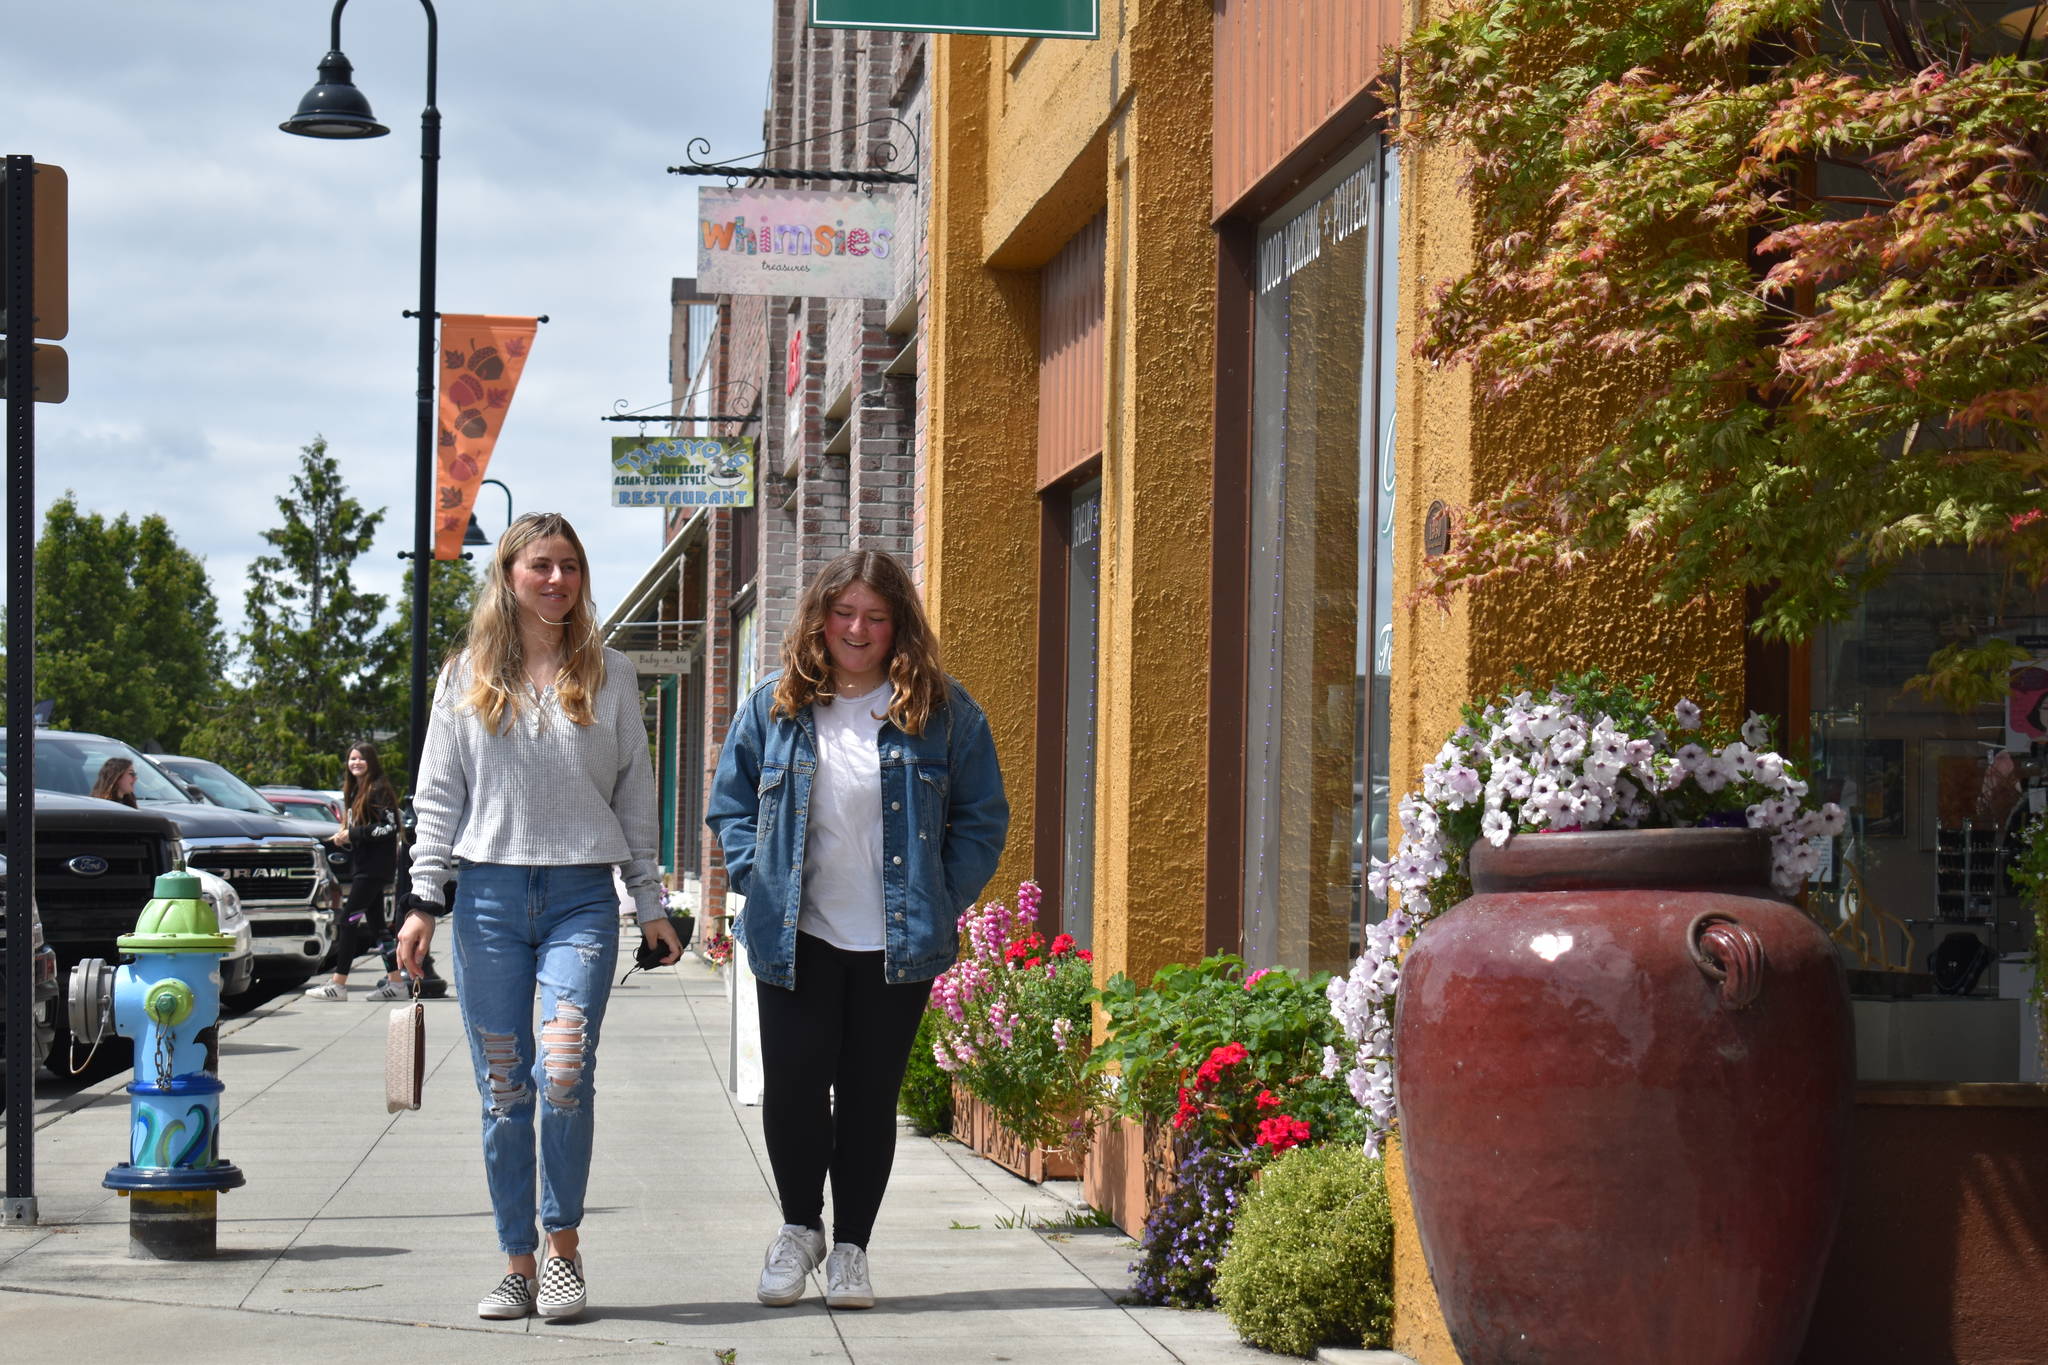 Katie McGowan, left, and Ava Lang, right, walking to lunch in downtown Oak Harbor. (Photo by Emily Gilbert/Whidbey News-Times)